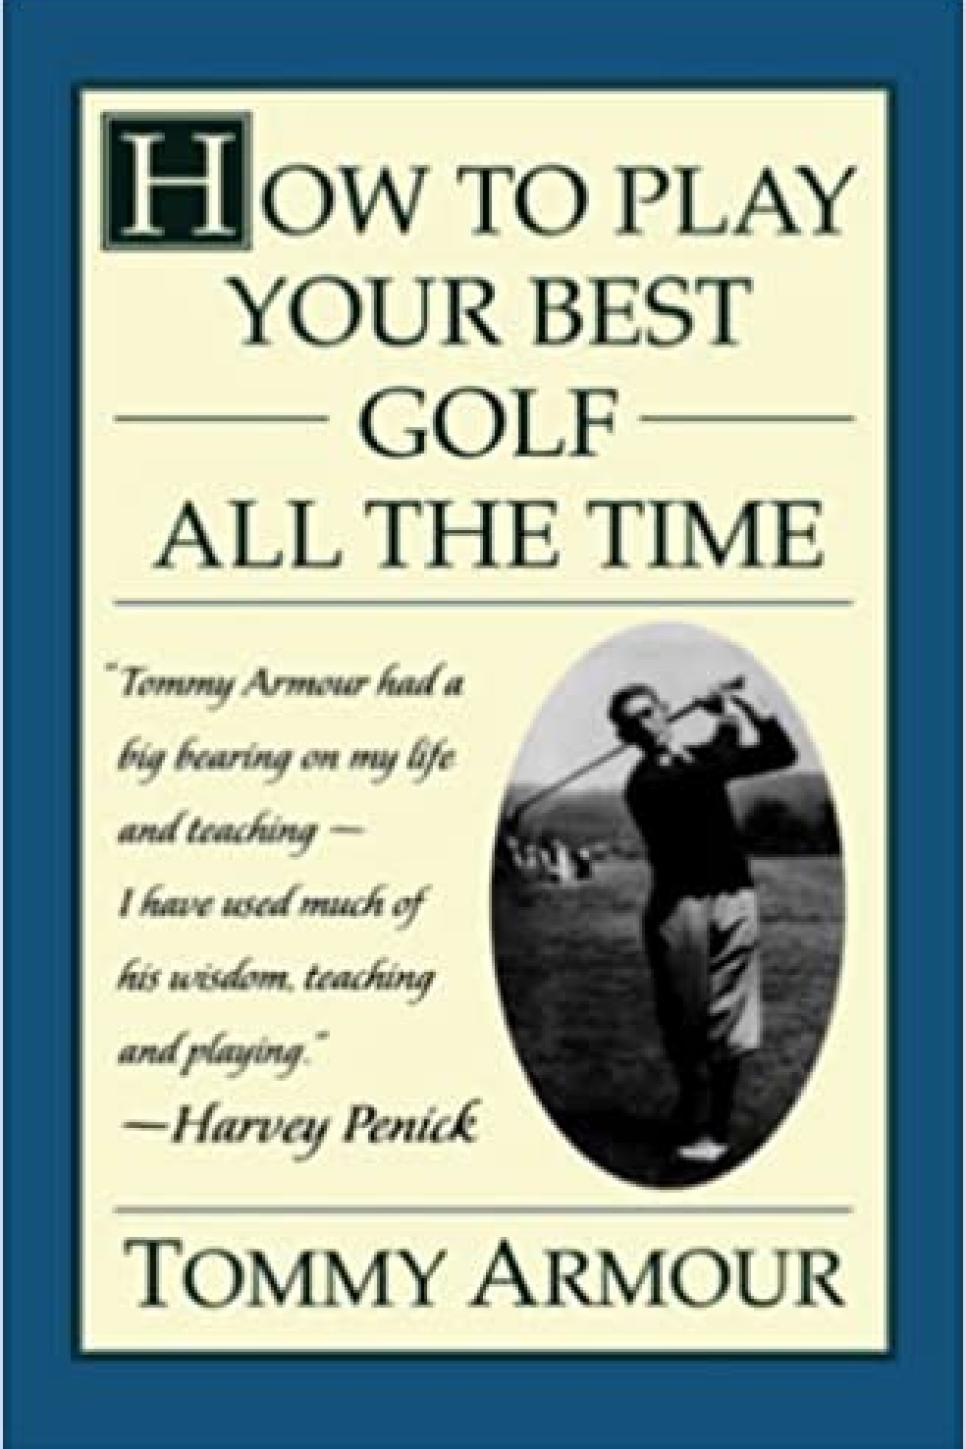 rx-amazonhow-to-play-your-best-golf-all-the-time-by-tommy-armour-1953.jpeg